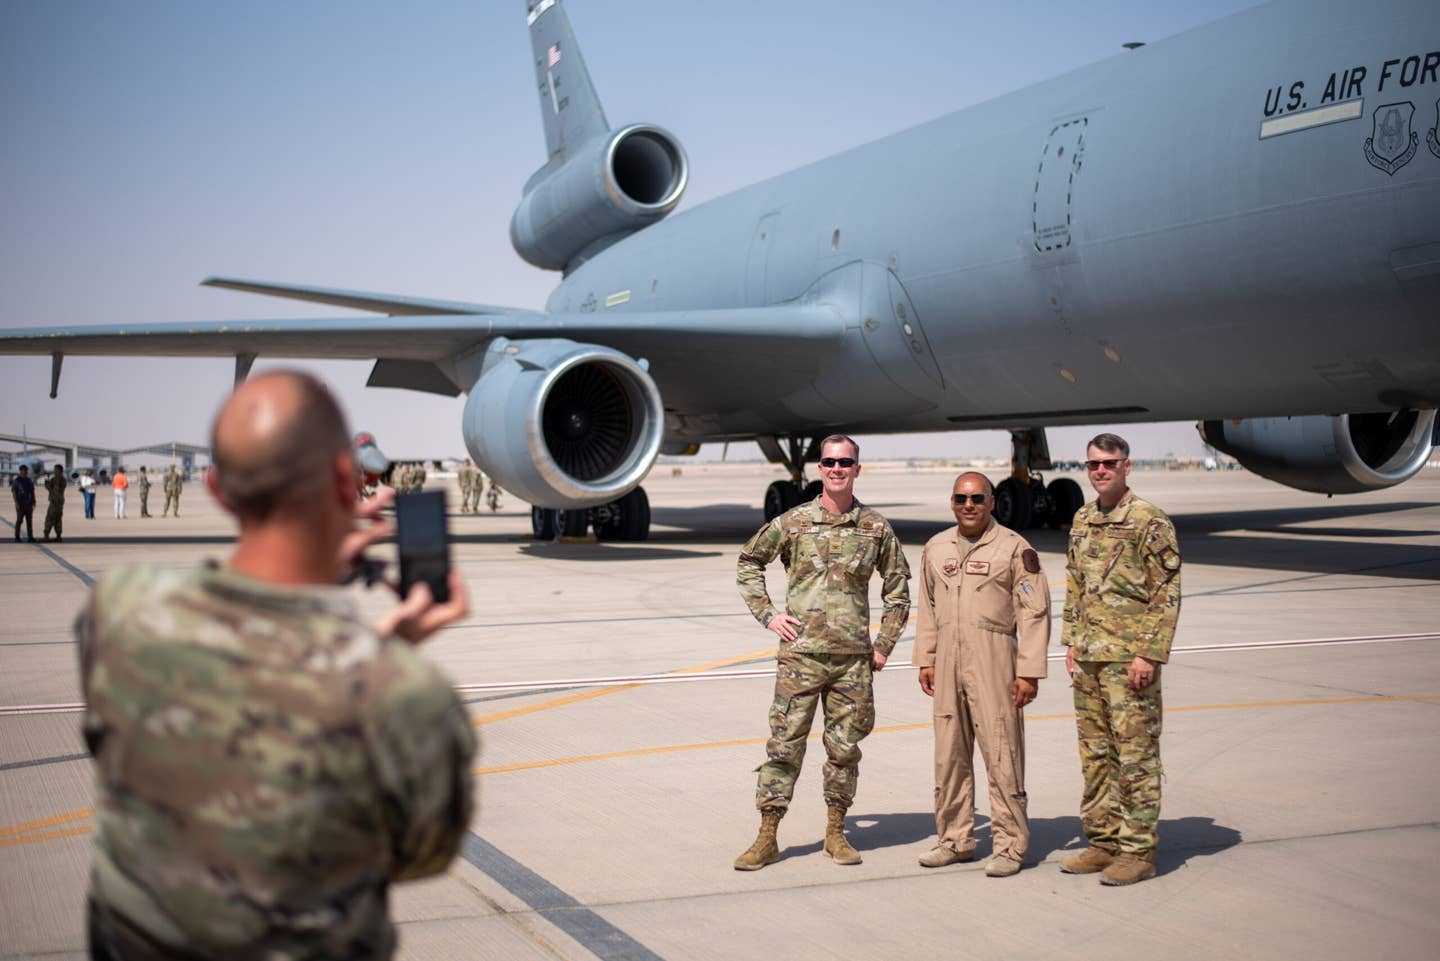 U.S. Air Force Col. Clinton Varty (left), 60th Maintenance Group commander, Brig. Gen. Akshai Gandhi (center), 378th Air Expeditionary Wing commander, and Col. Colin McClaskey (right), 821st Contingency Response Group deputy commander, pose for a group photo in front of a KC-10 Extender at Prince Sultan Air Base, Oct. 4, 2023. <em>U.S. Air Force photo by Tech. Sgt. Alexander Frank</em>